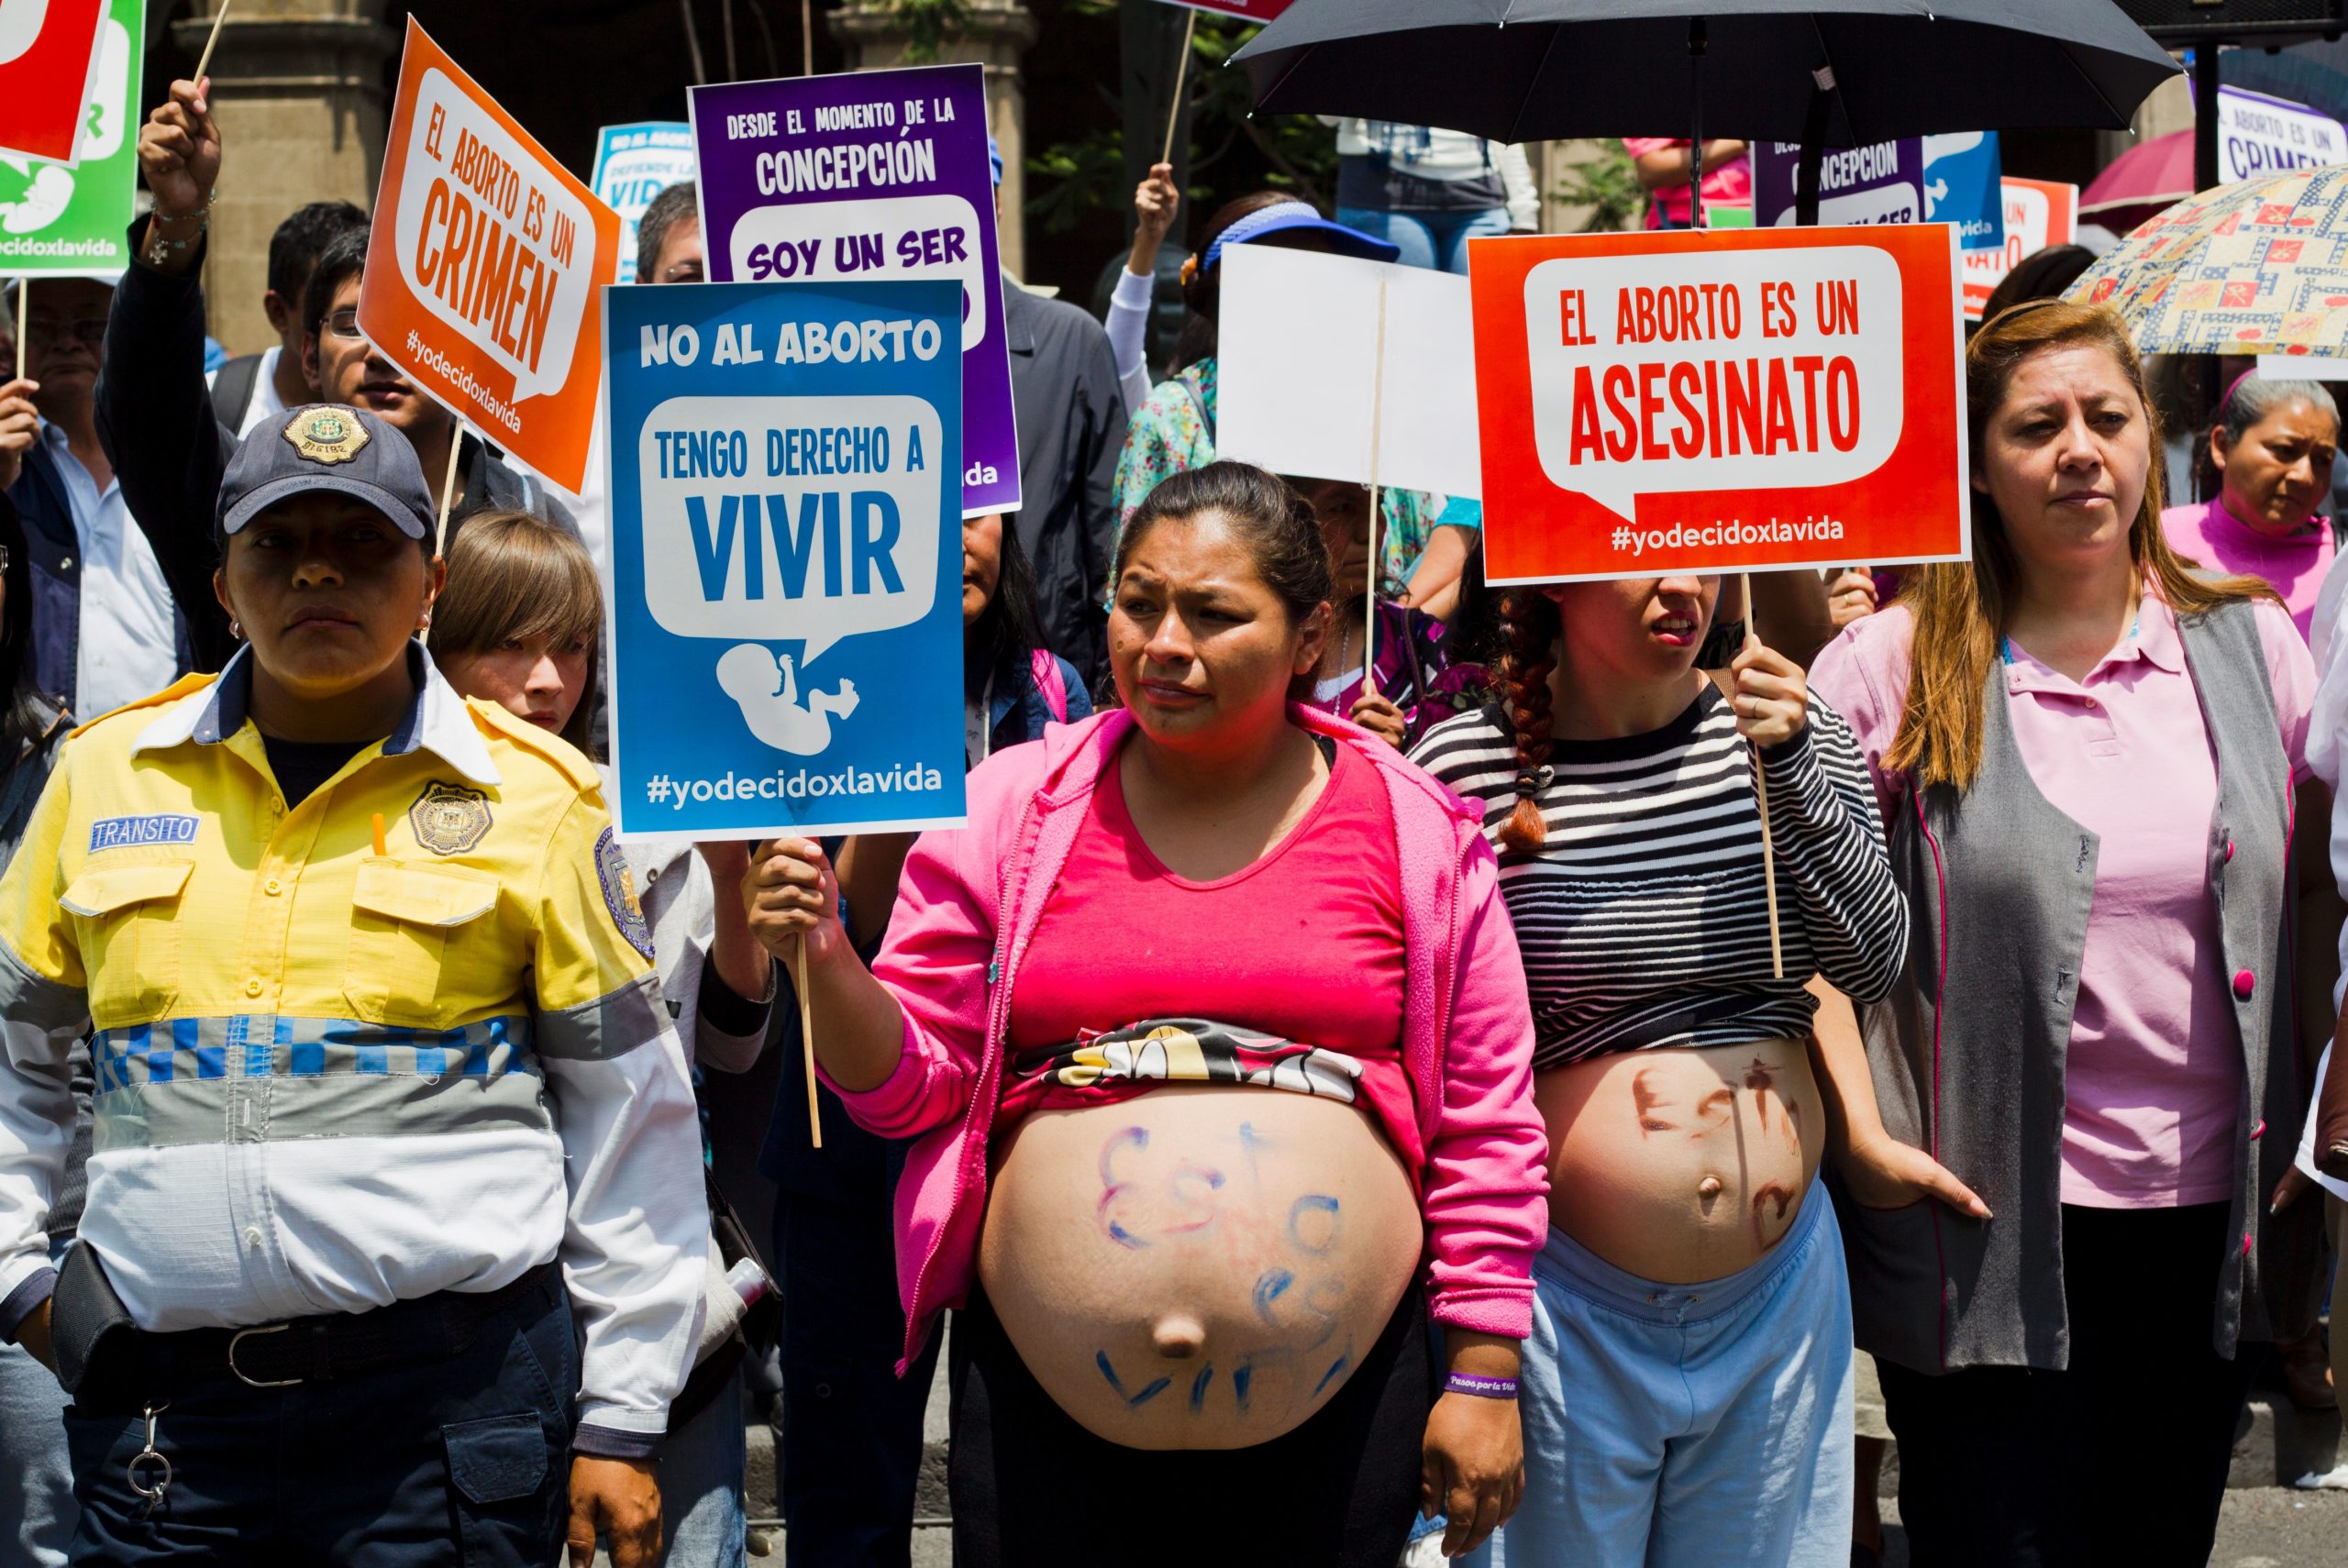 Catholic anti-abortion activists protest as the Supreme Court debates on whether to declare unconstitutional certain points of an abortion law which would open a loophole for its gradual decriminalization across the country, in front of the Supreme Court in Mexico City on June 29, 2016. (Photo credit should read HECTOR GUERRERO/AFP via Getty Images)